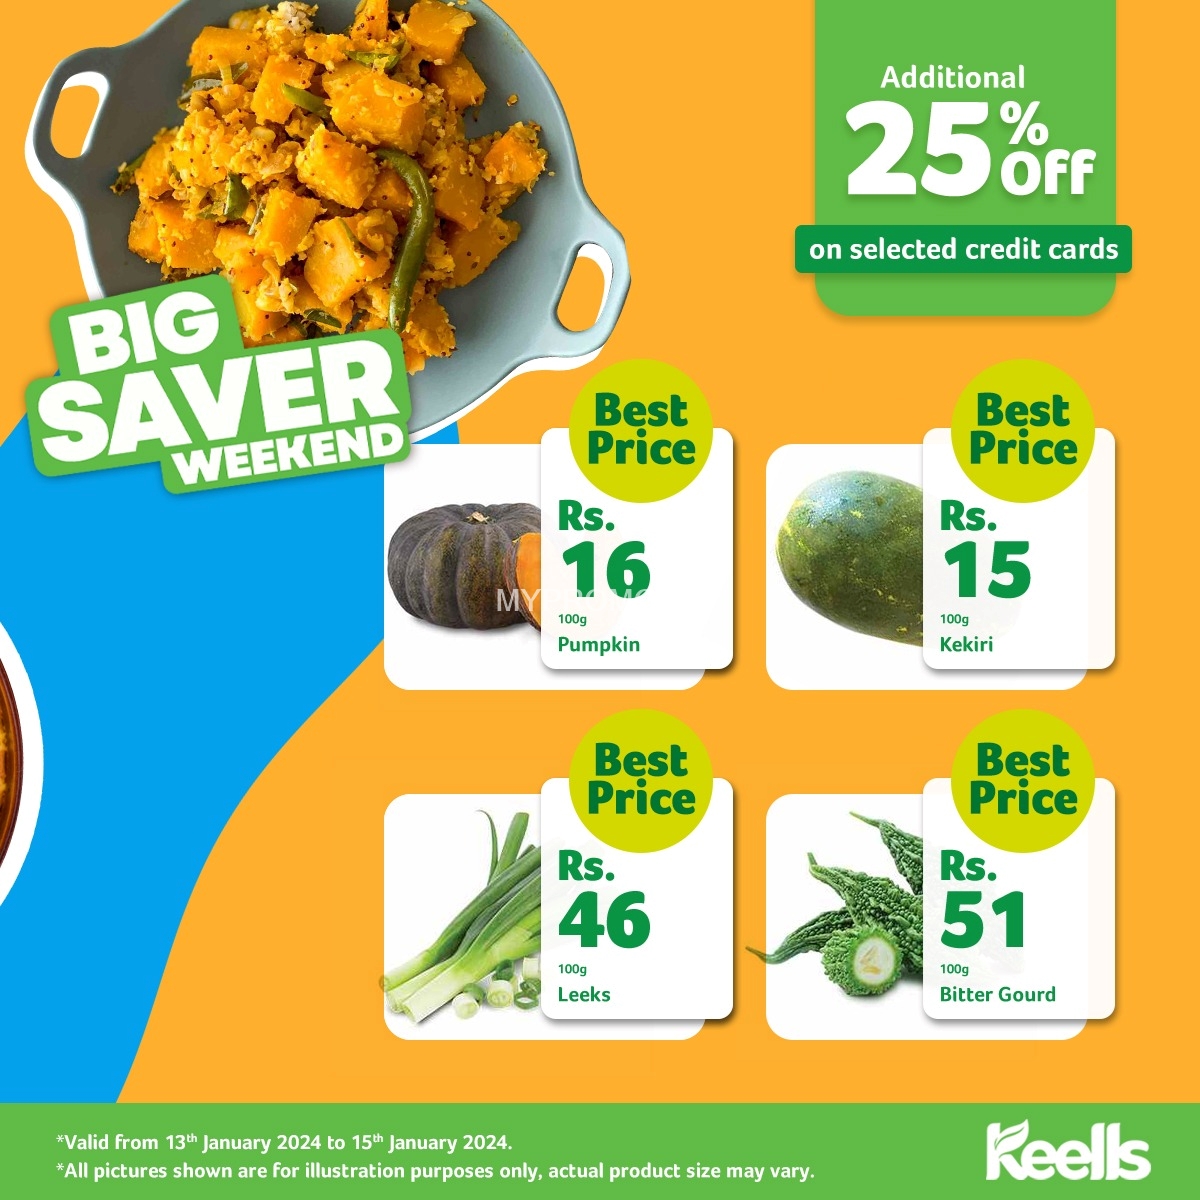 Experience the real taste of freshness when you buy the freshest groceries and food for great prices at Keells